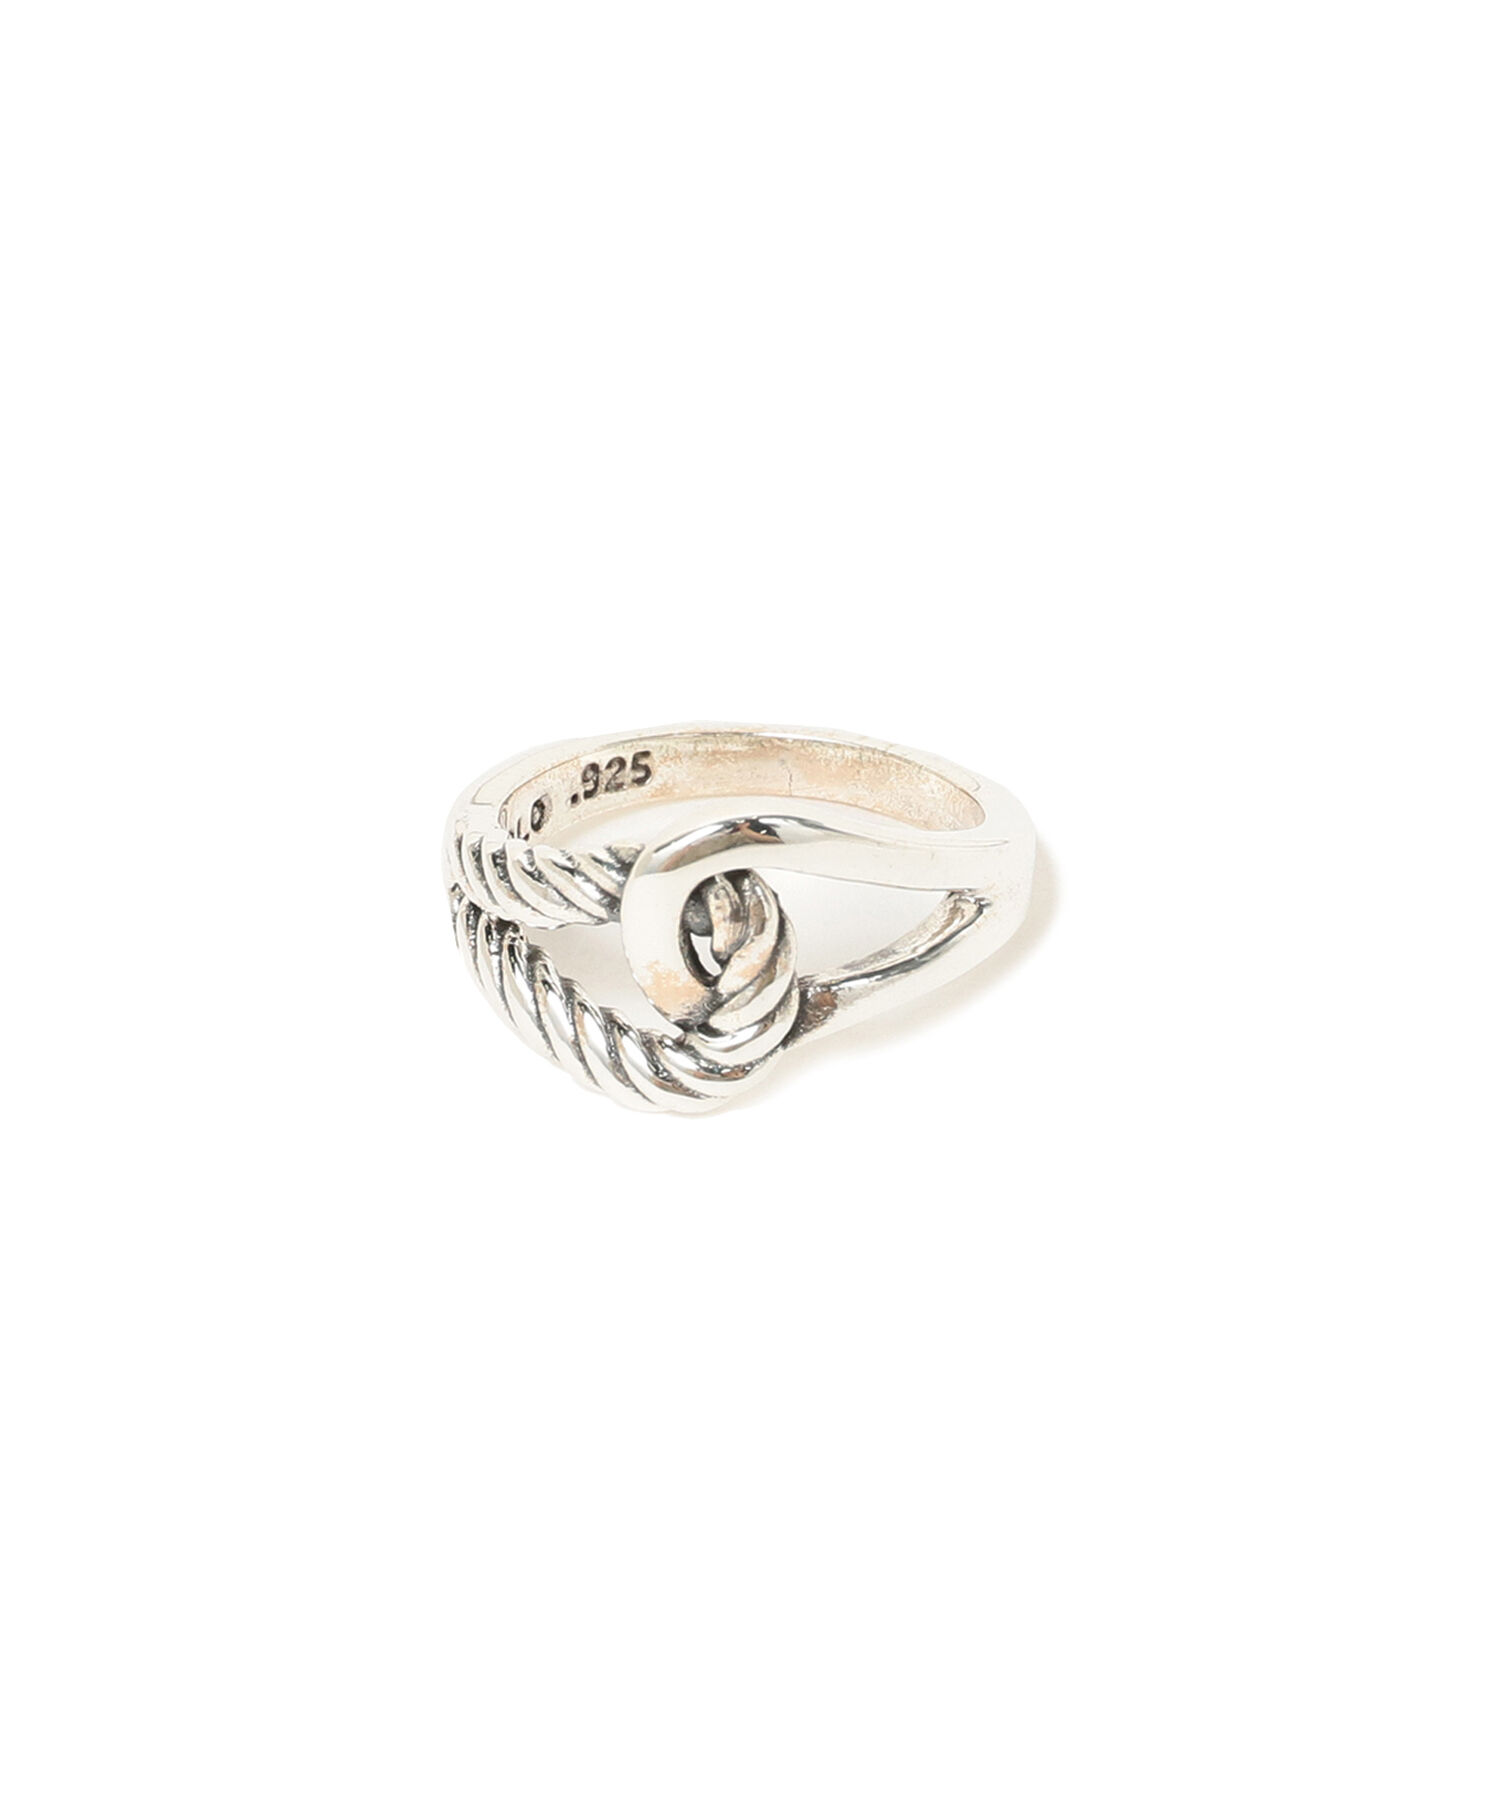 BEAMSXOLO JEWELRY Double Loop Ring